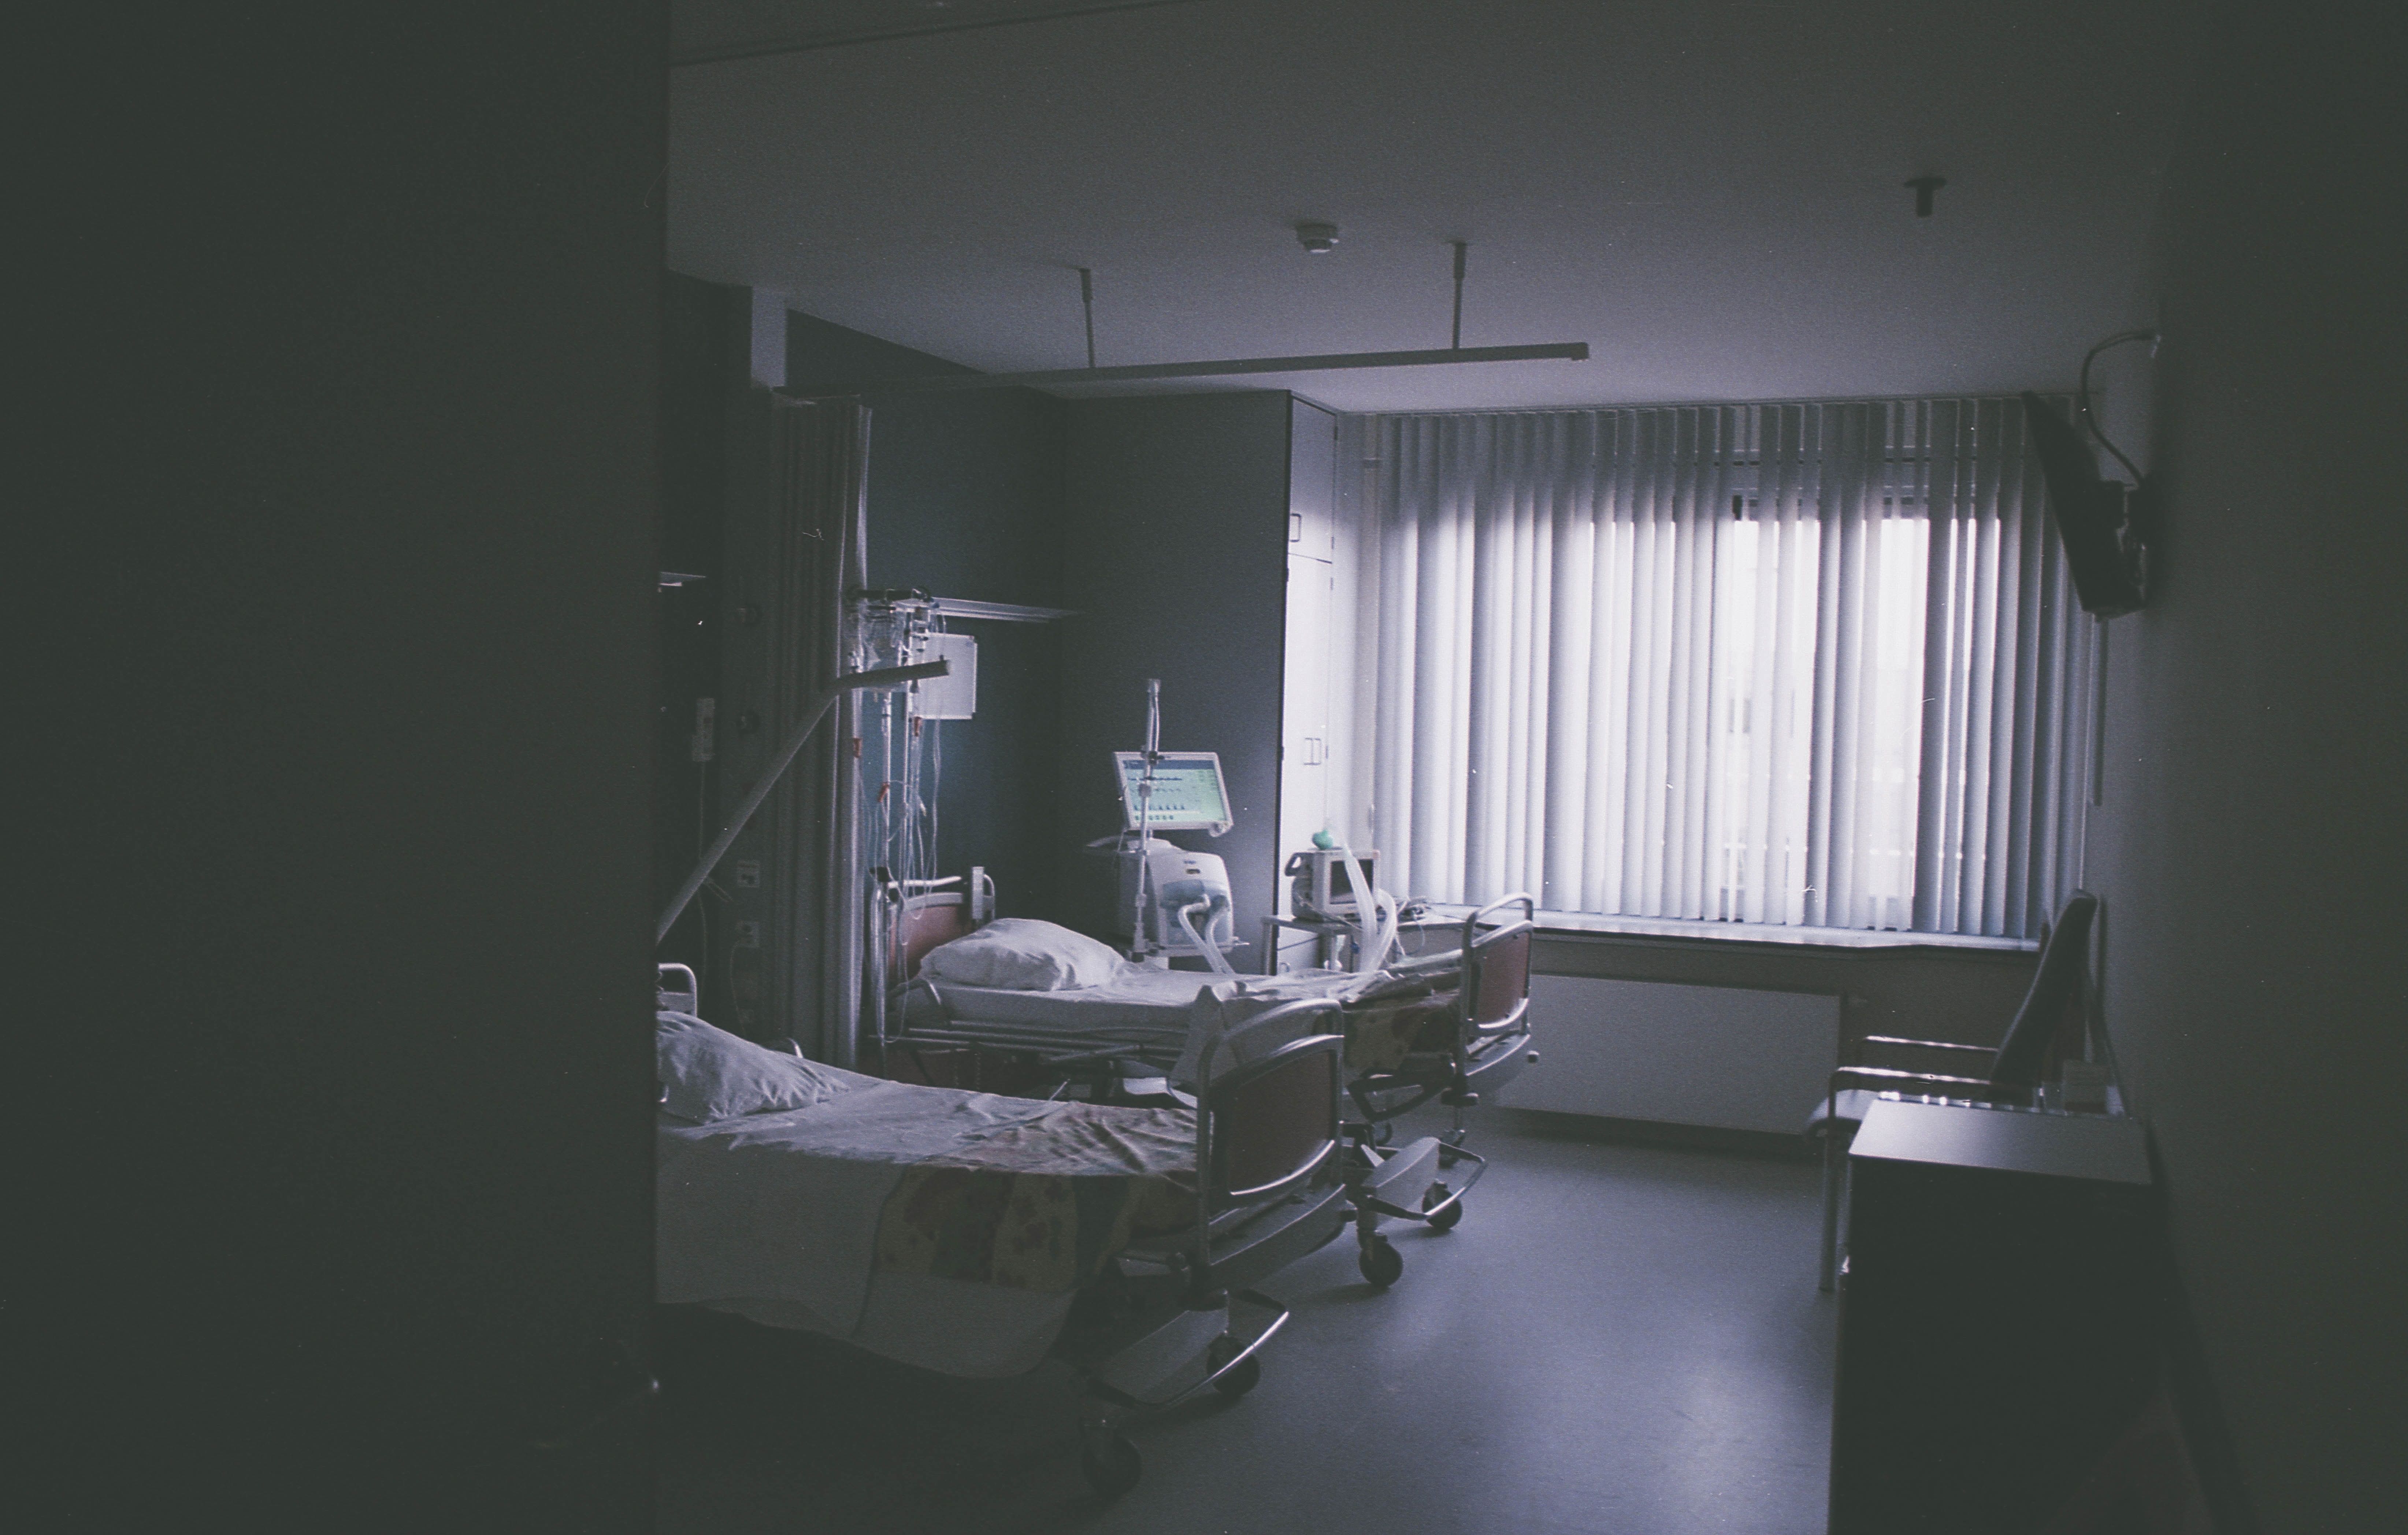 Hospital Picture. Download Free Image